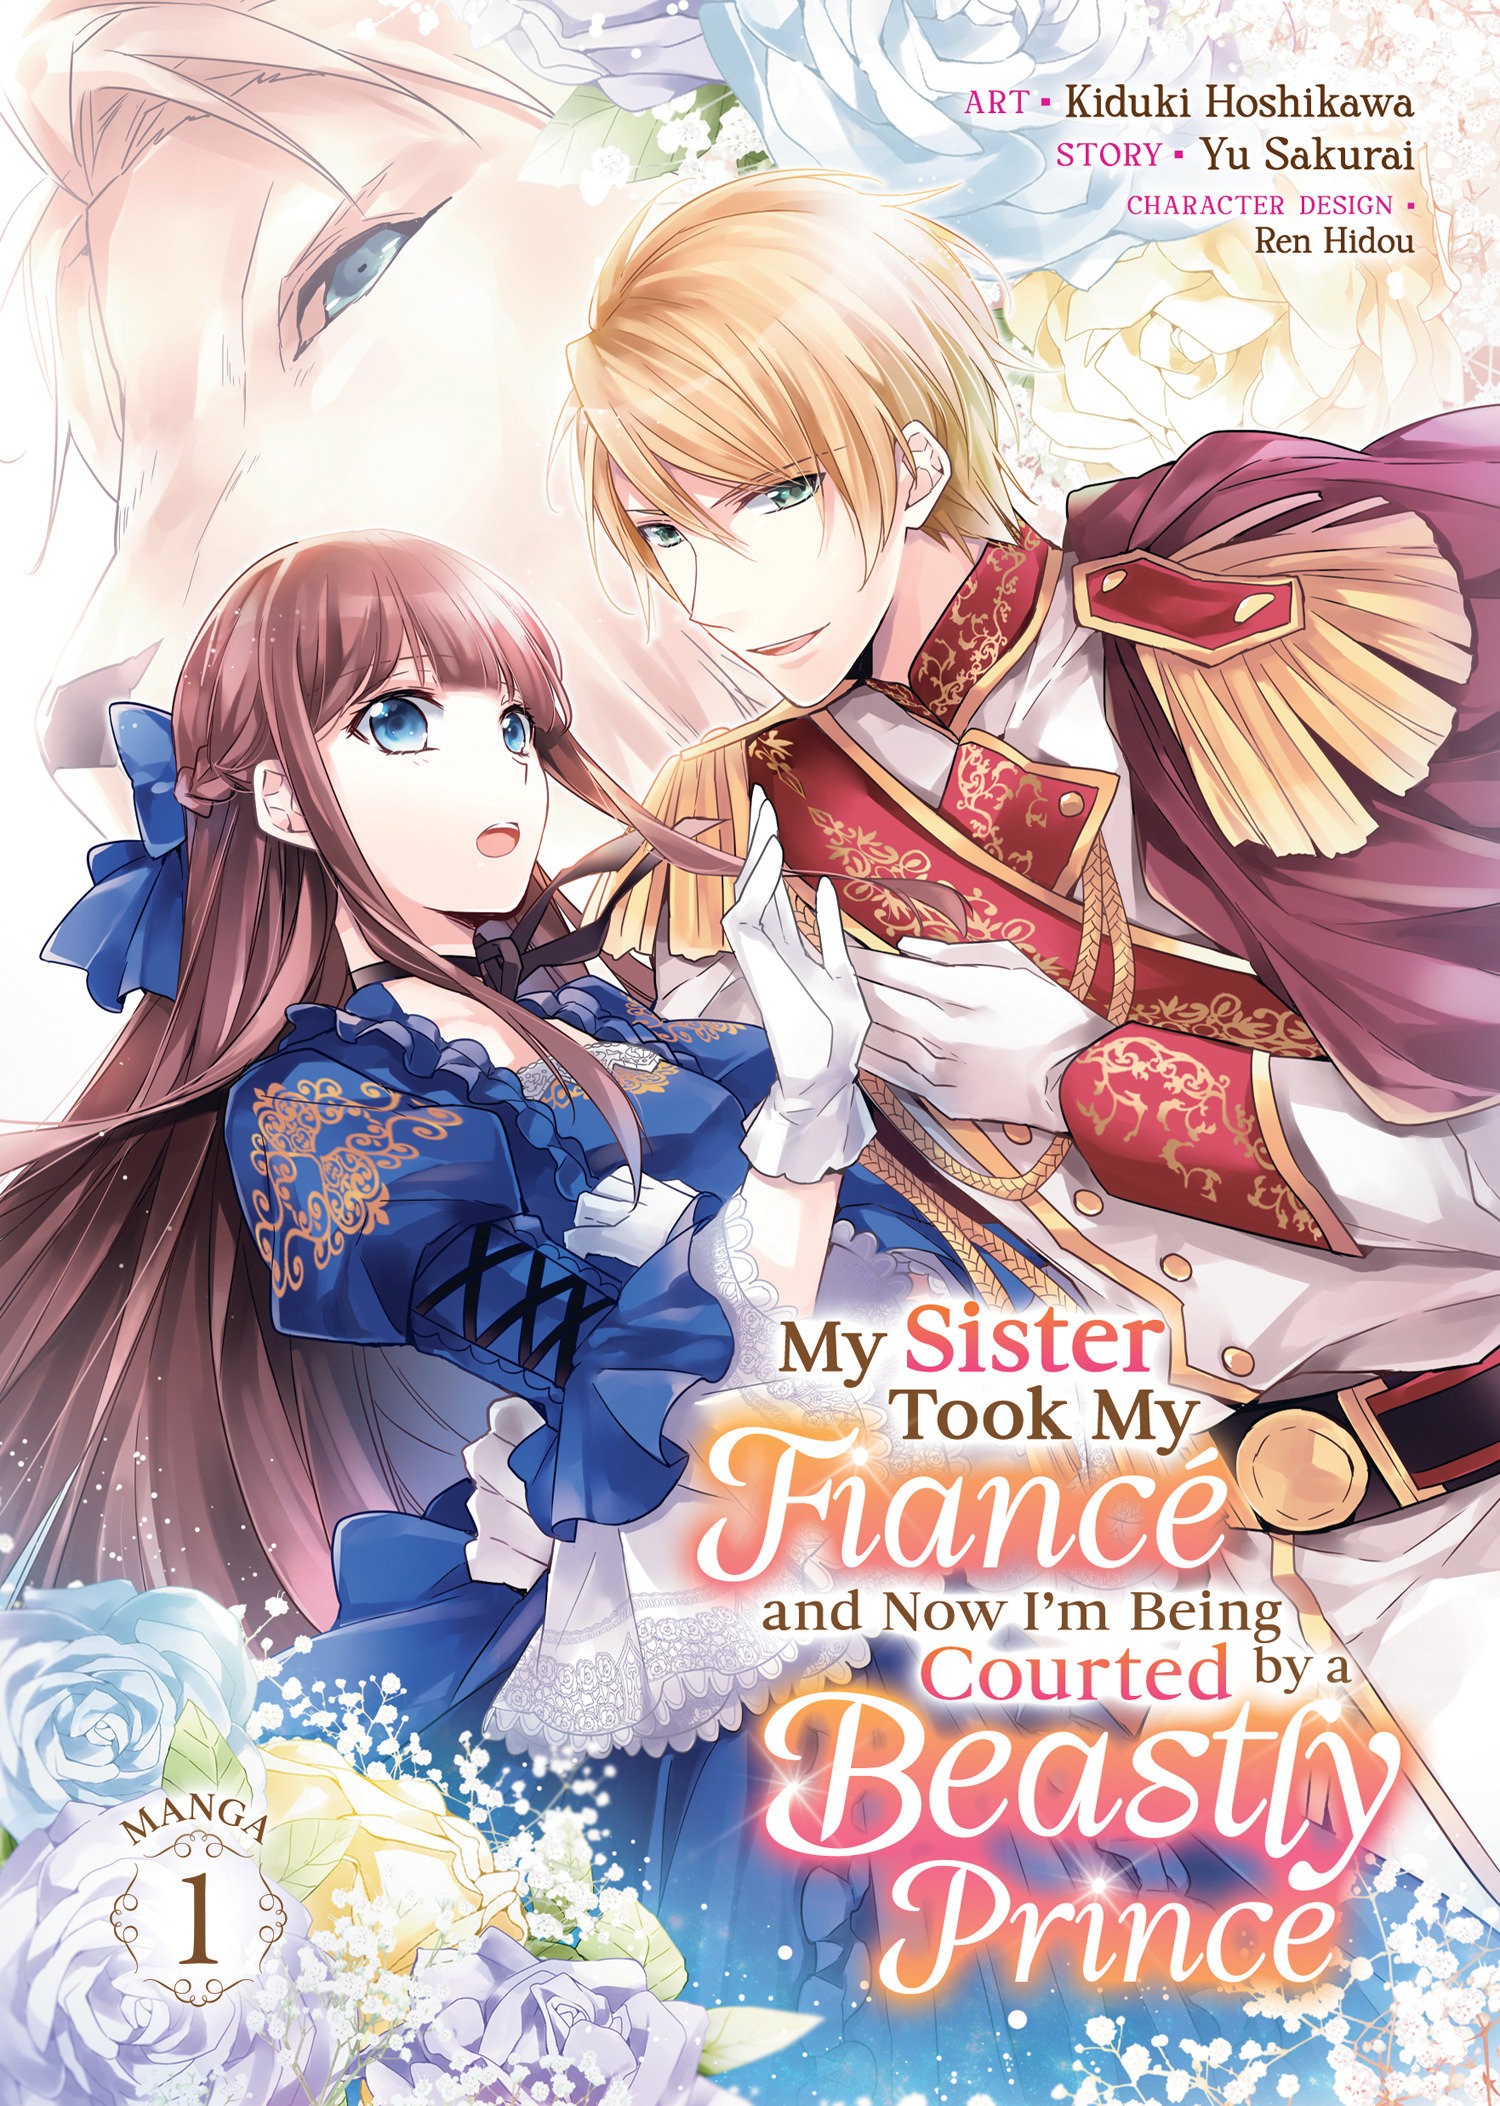 My Sister Took My Fiancé and Now I'm Being Courted by a Beastly Prince Manga Volume 1